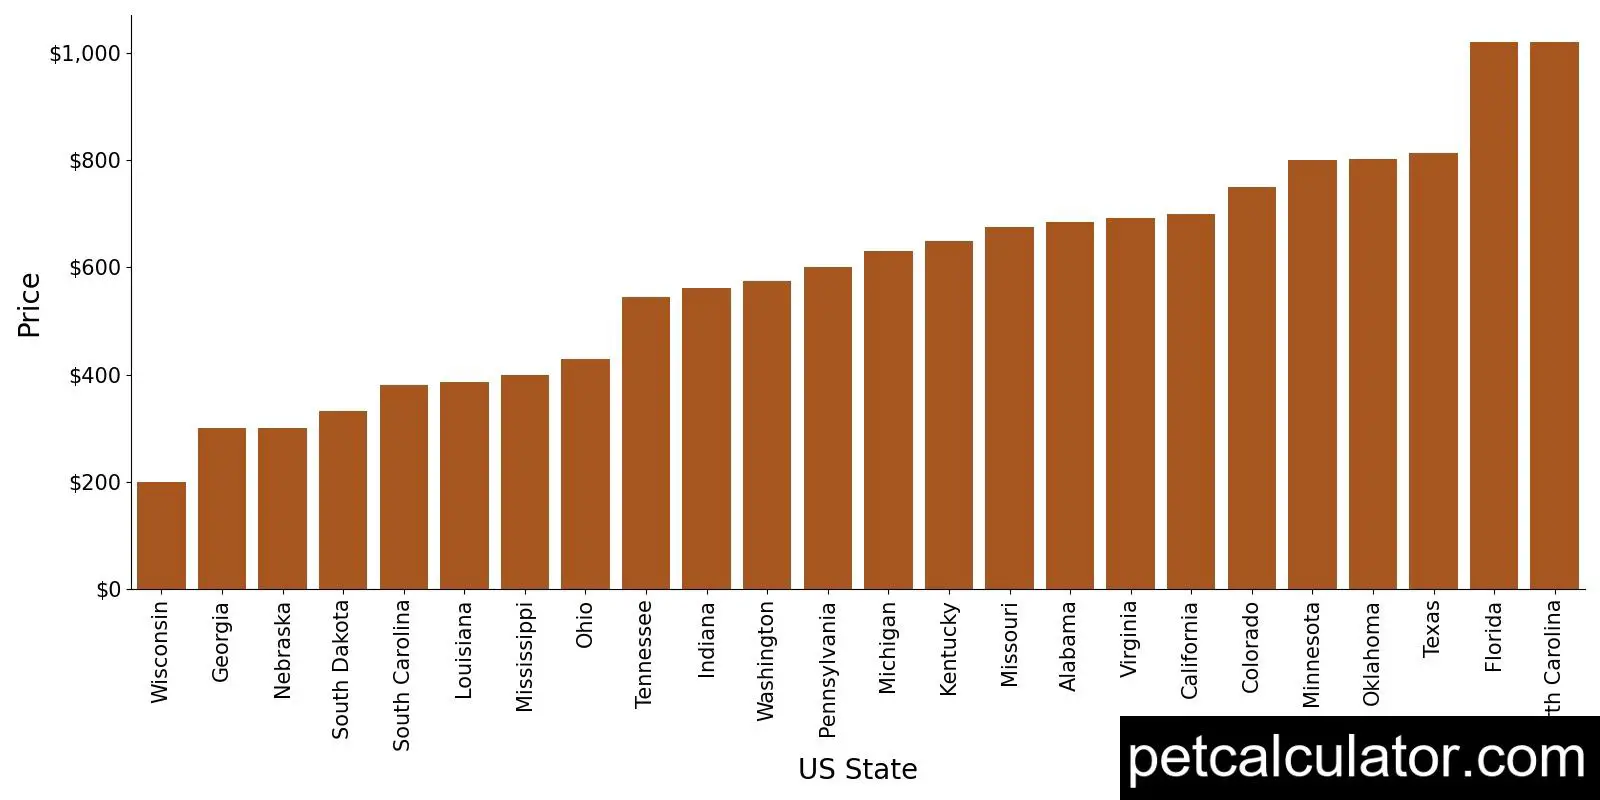 Price of Catahoula Leopard Dog by US State 